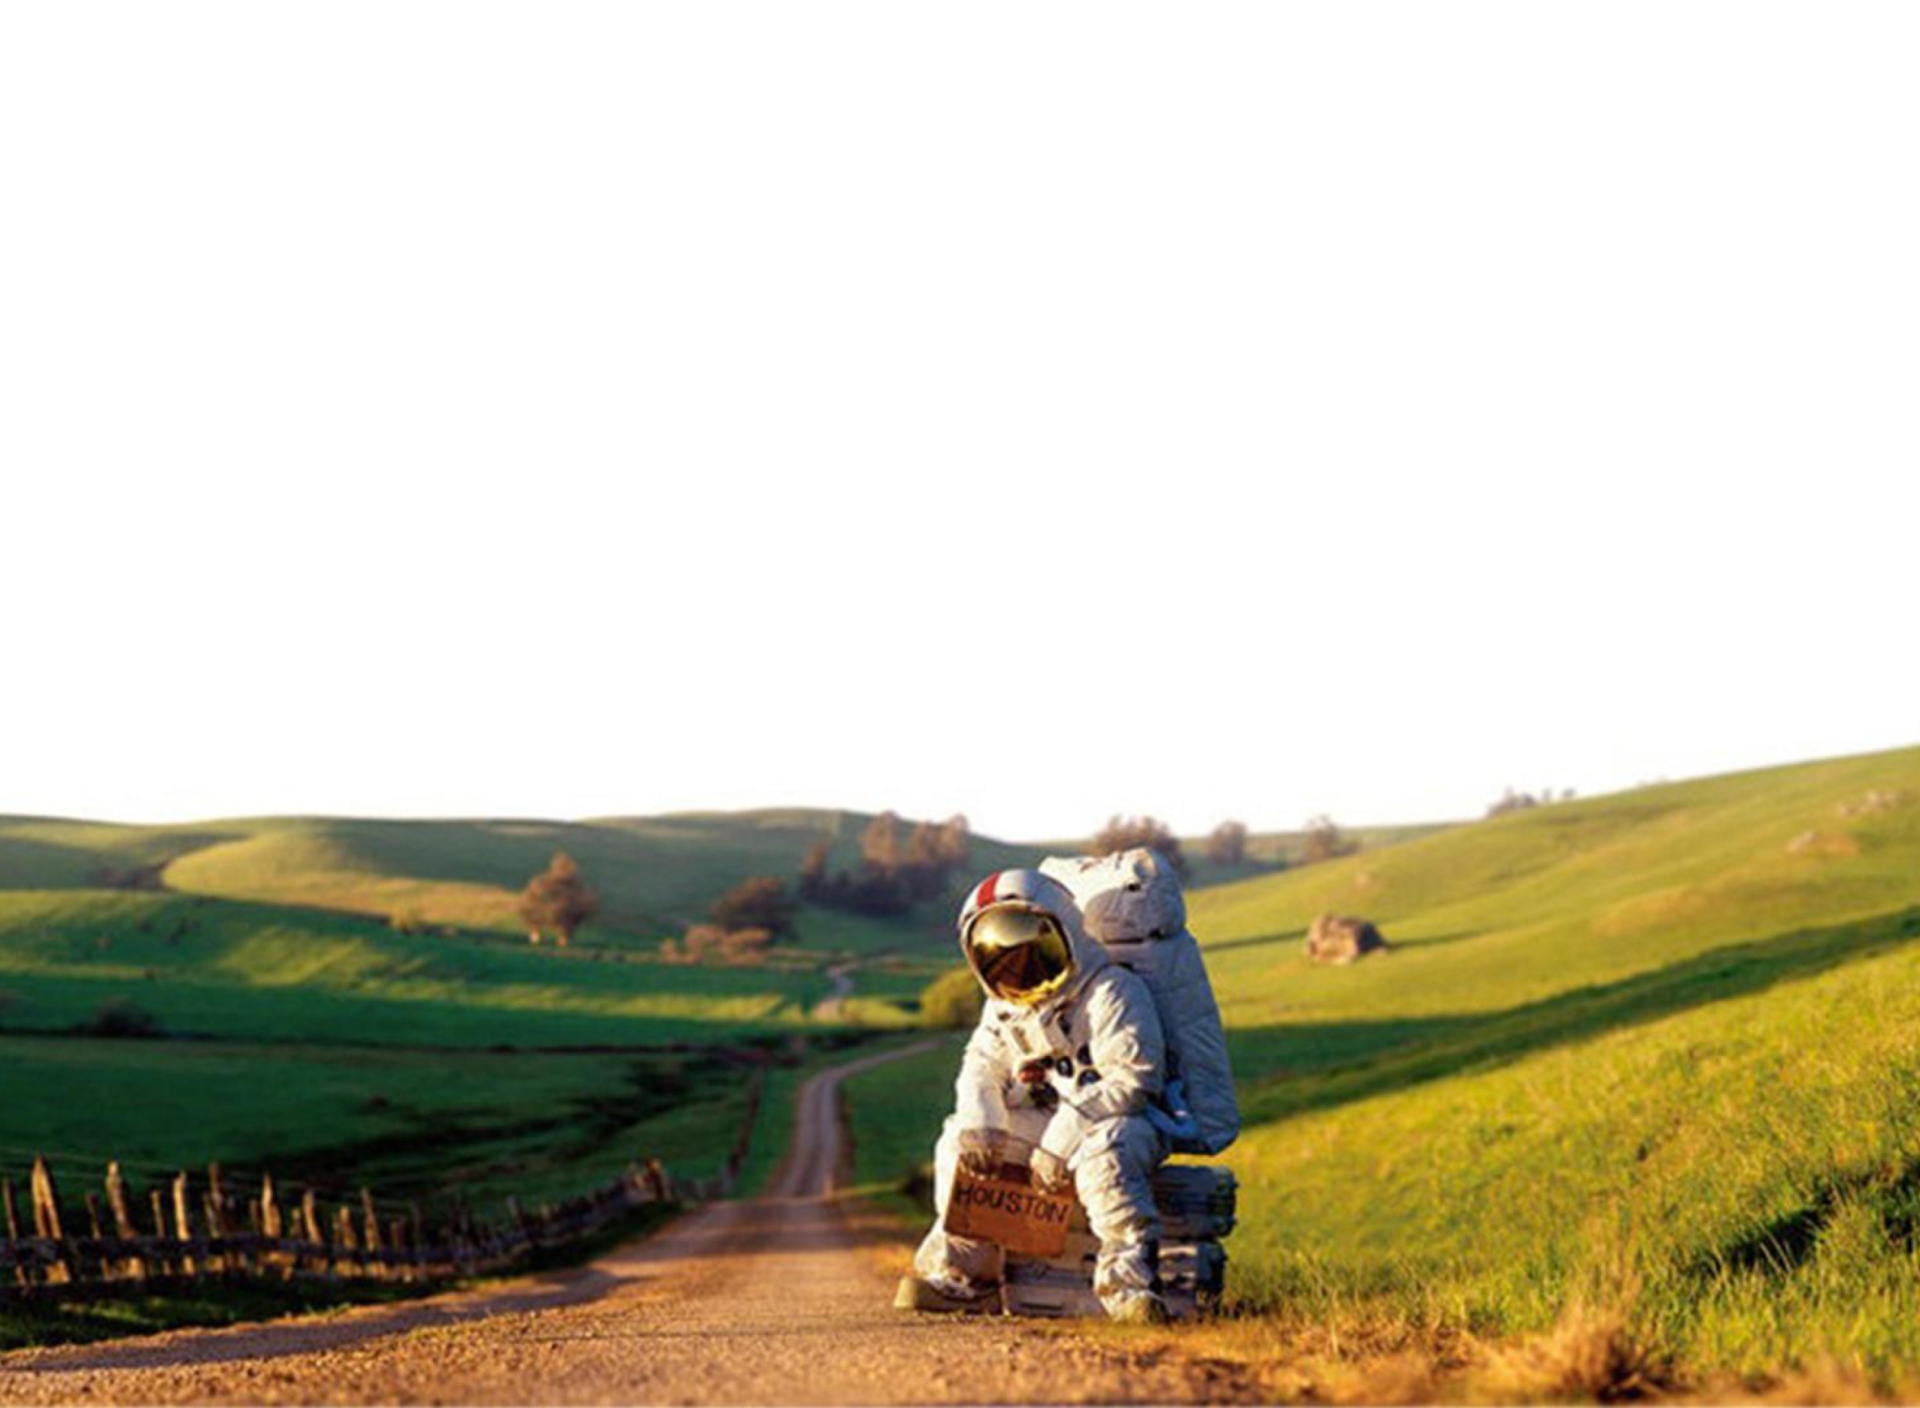 Astronaut On The Road wallpaper 1920x1408